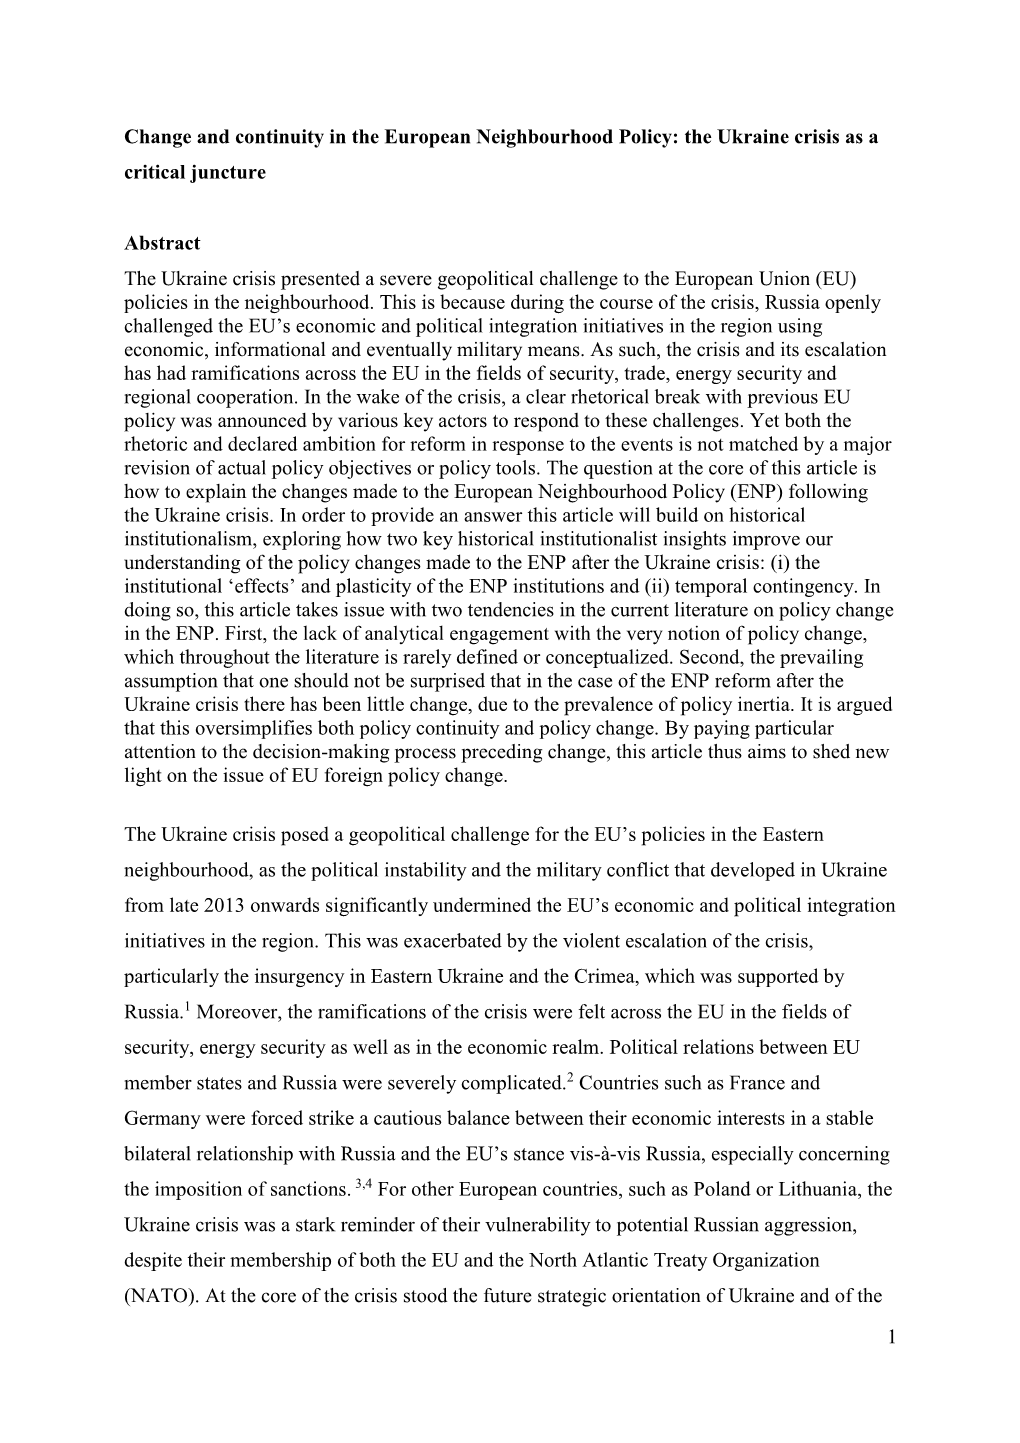 1 Change and Continuity in the European Neighbourhood Policy: the Ukraine Crisis As a Critical Juncture Abstract the Ukraine